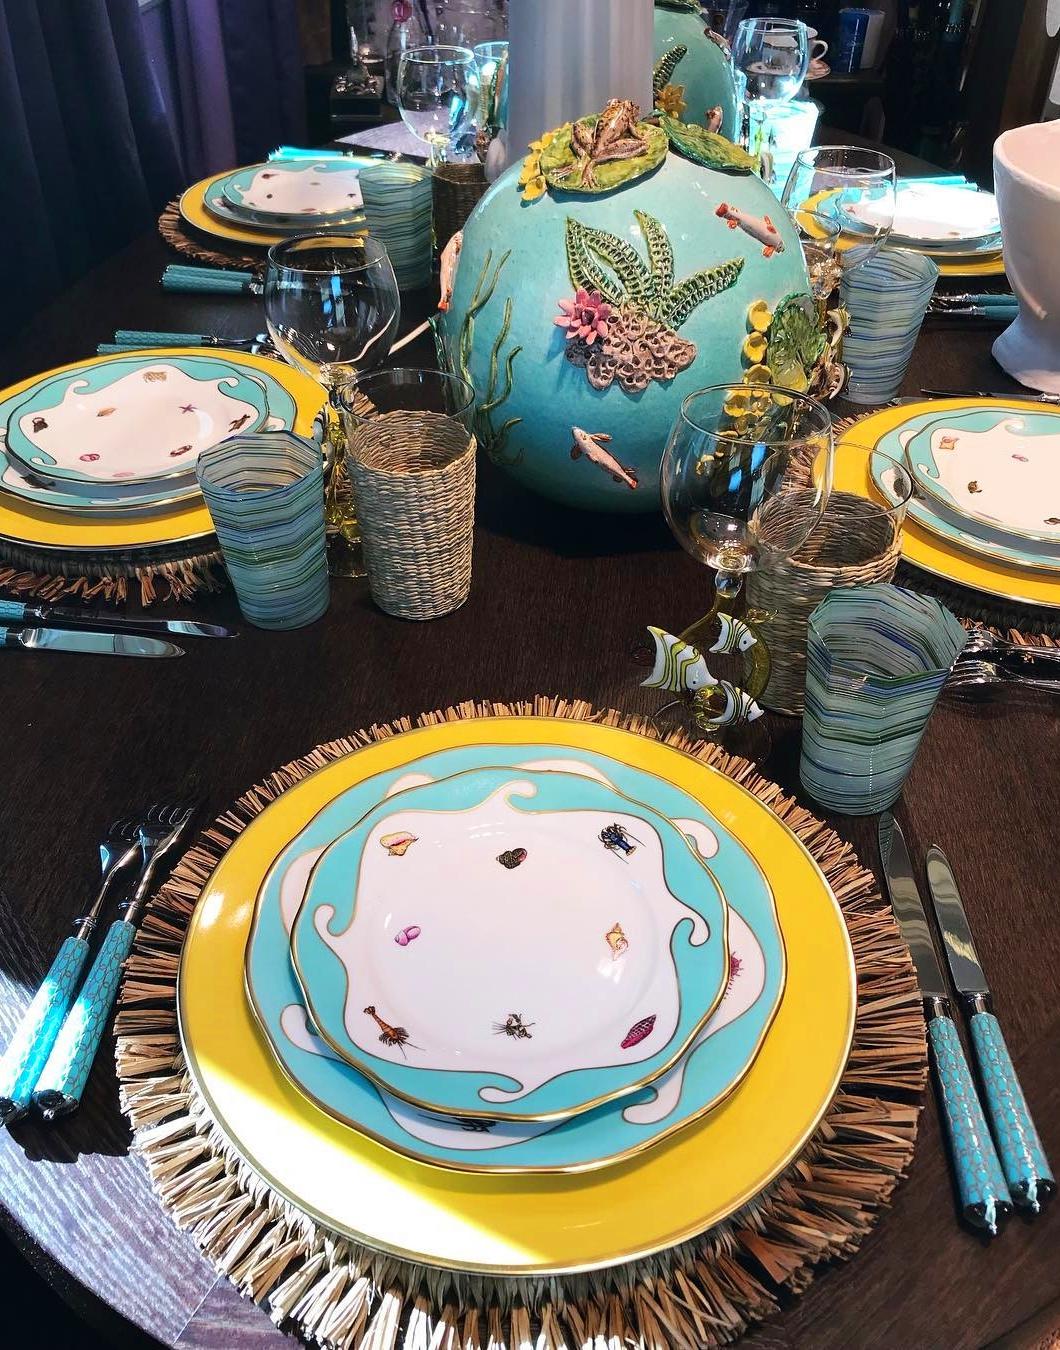 Summer Table Decorations; Summer Decor Dining Room Decor; Bright Color Table Decorations; Romantic Home Decorations; Lemon Table Decorations Center Pieces #roomdecor